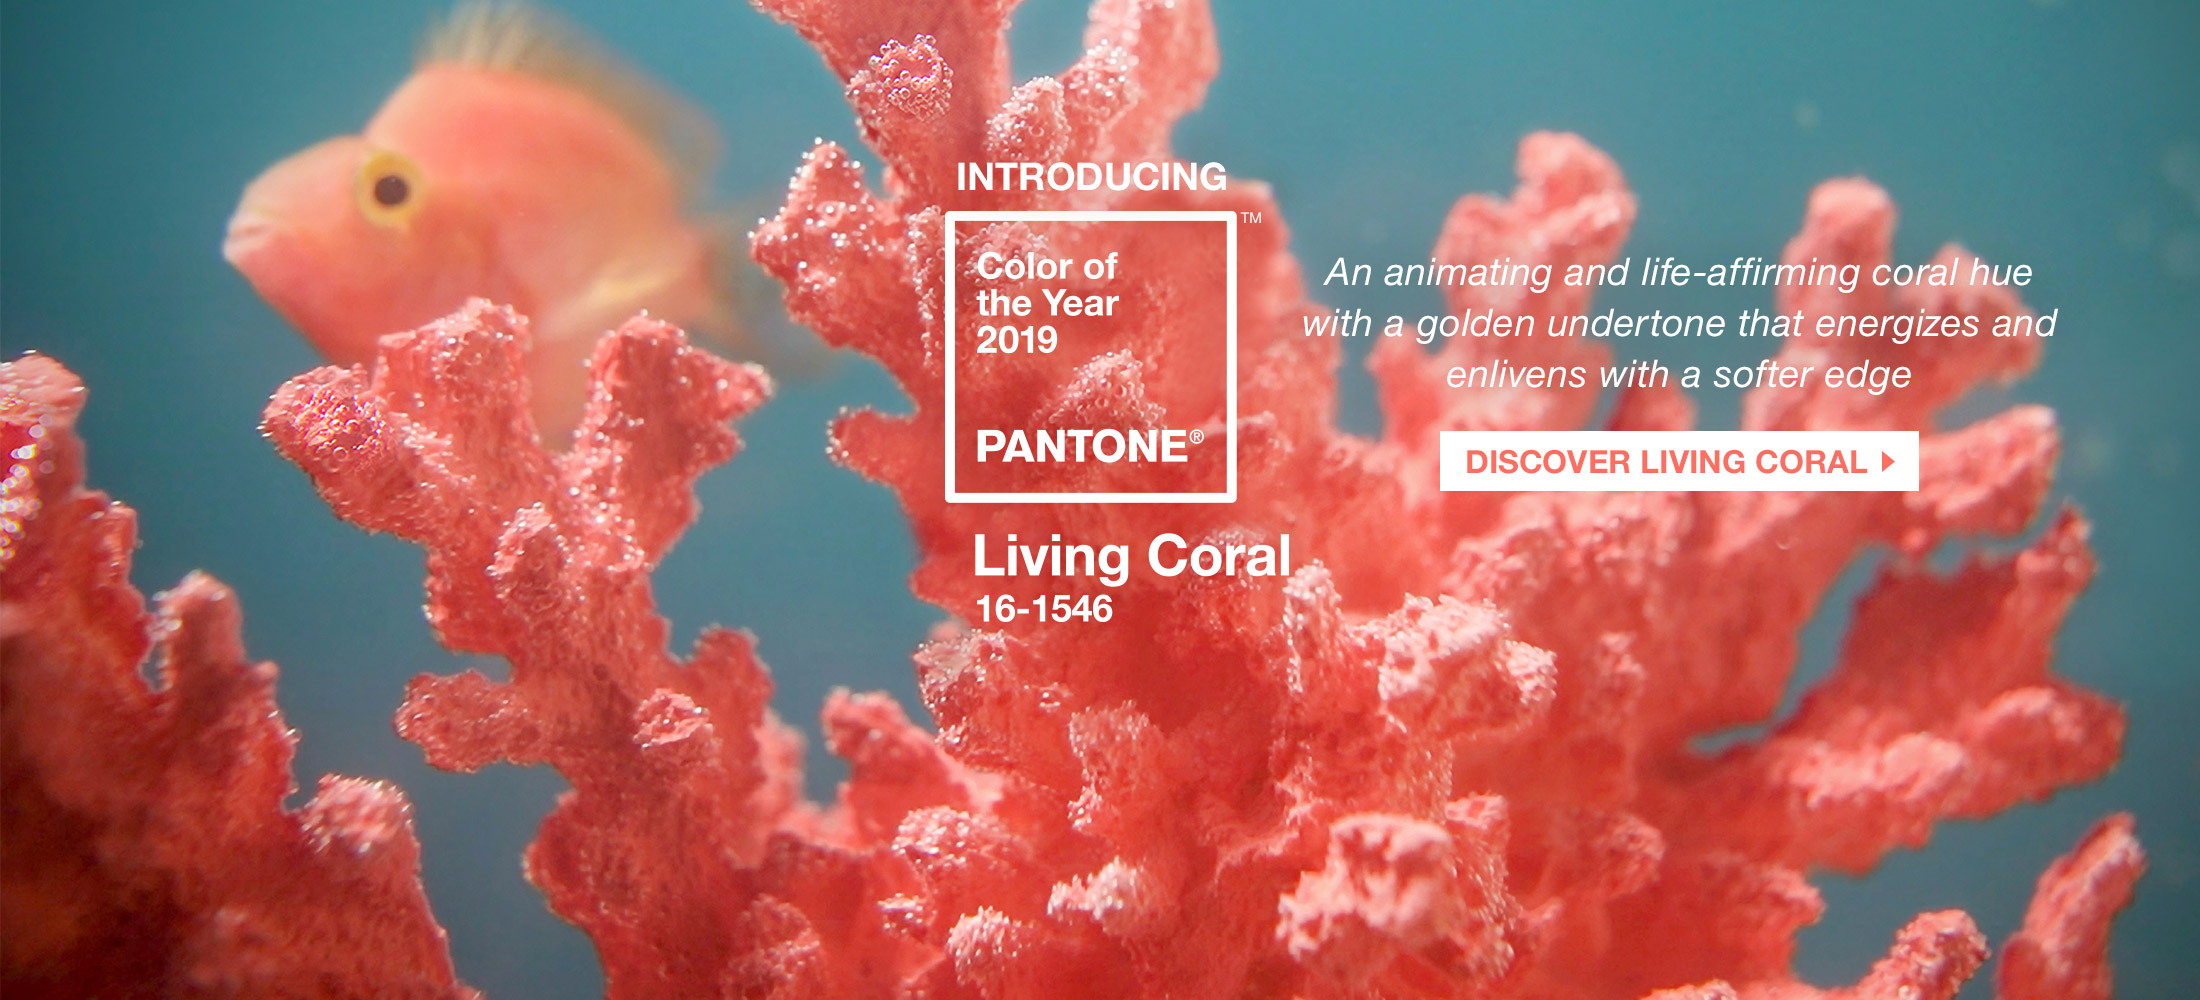 rgb-creative-ideas-pantone-color-of-the-year-2019-living-coral-homepage